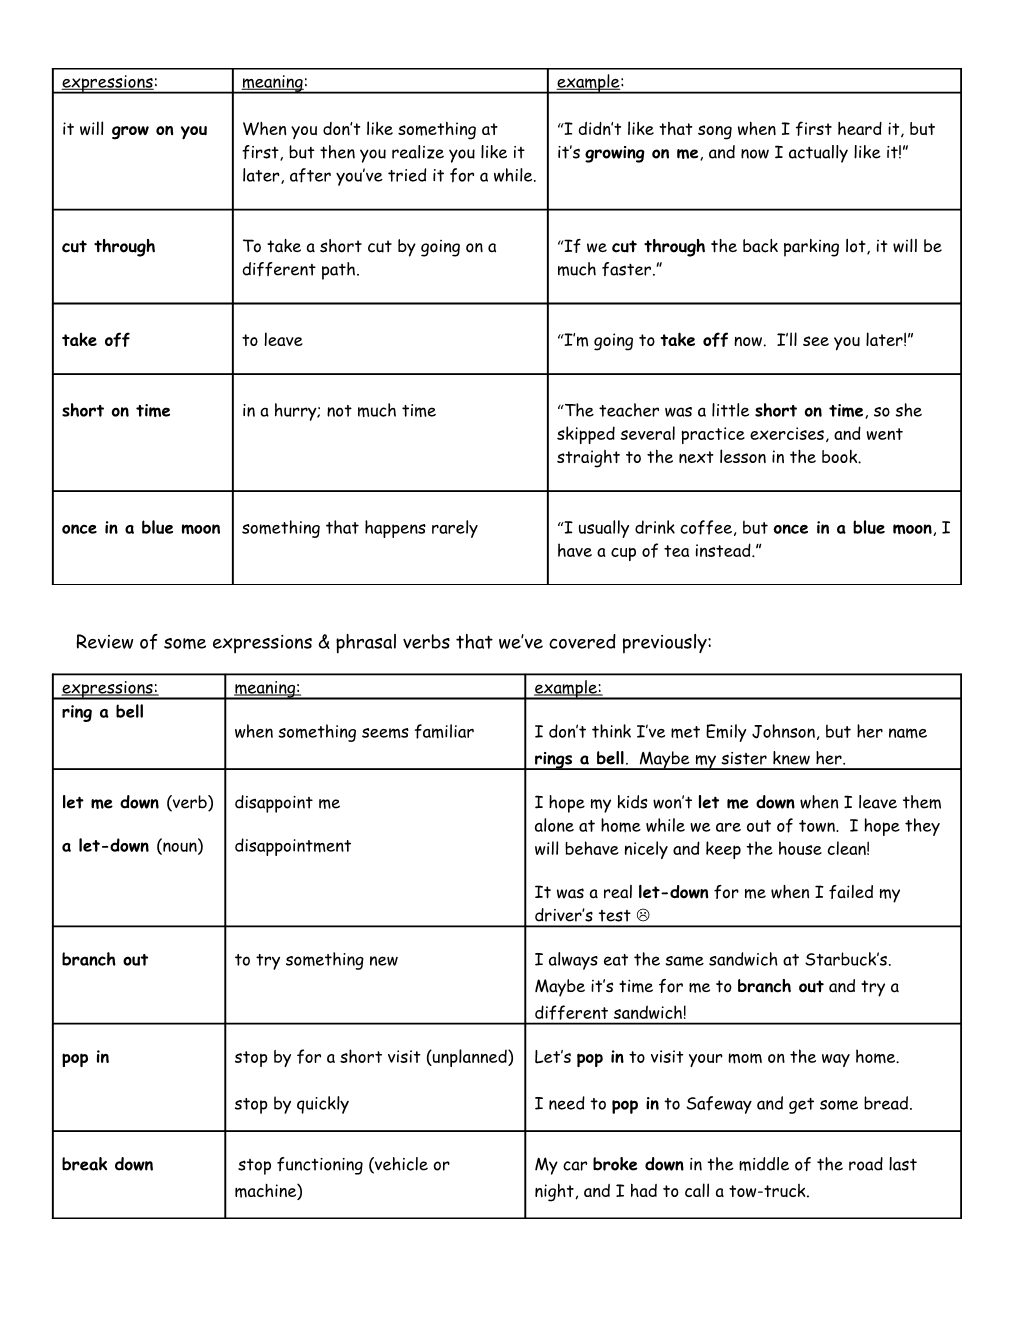 Review of Some Expressions & Phrasal Verbs That We Ve Covered Previously